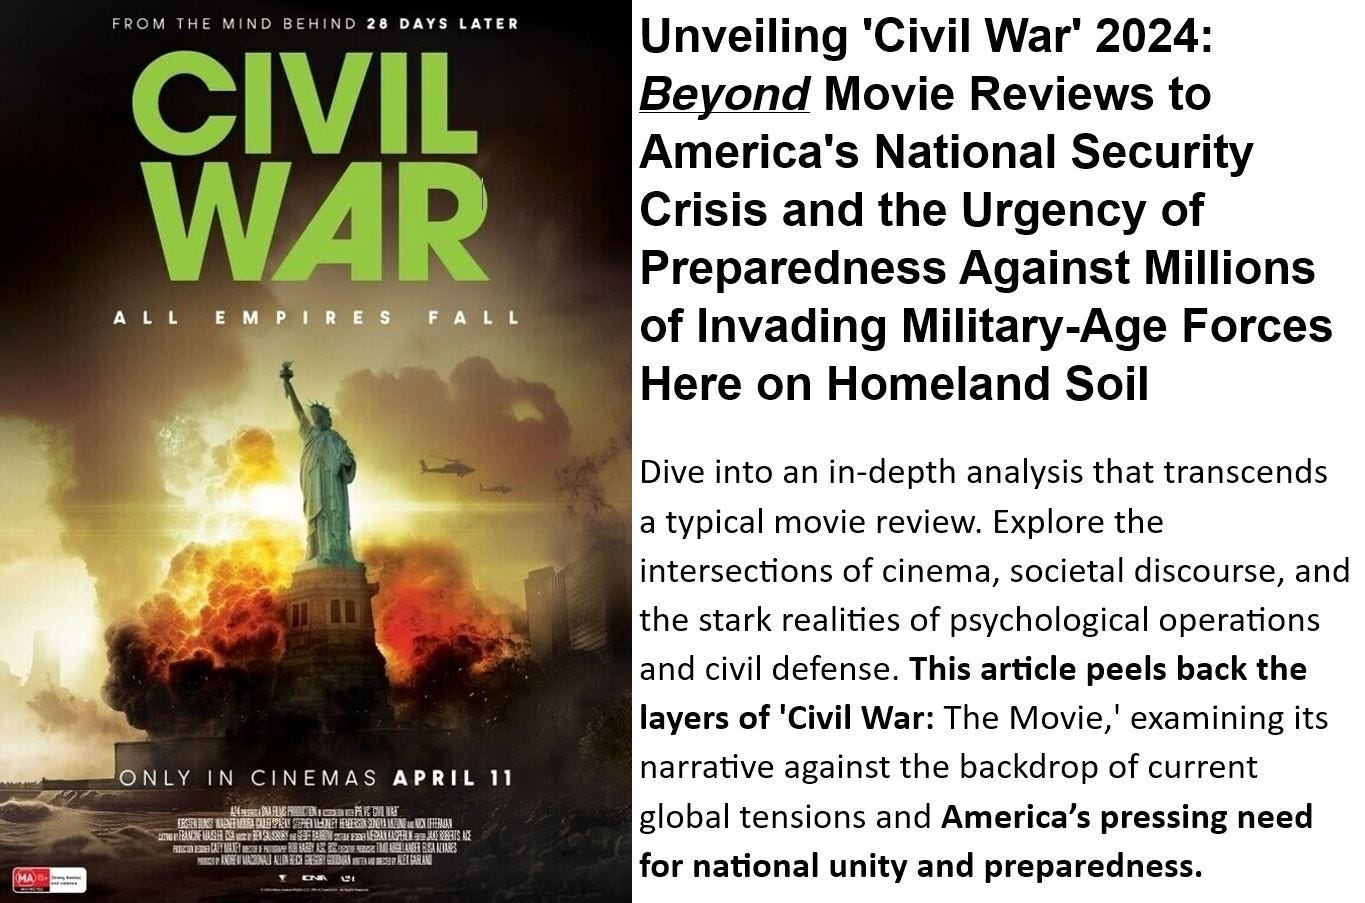 Explosive backdrop with the Statue of Liberty, helicopters overhead, and the title 'Civil War: The Movie' in green, symbolizing the film's dramatic portrayal of national conflict. Unveiling 'Civil War' 2024: Beyond Movie Reviews to America's National Security Crisis and the Urgency of Preparedness Against Millions of Invading Military-Age Forces Here on Homeland Soil   Dive into an in-depth analysis that transcends a typical movie review. Explore the intersections of cinema, societal discourse, and the stark realities of psychological operations and civil defense. This article peels back the layers of 'Civil War: The Movie,' examining its narrative against the backdrop of current global tensions and America’s pressing need for national unity and preparedness.